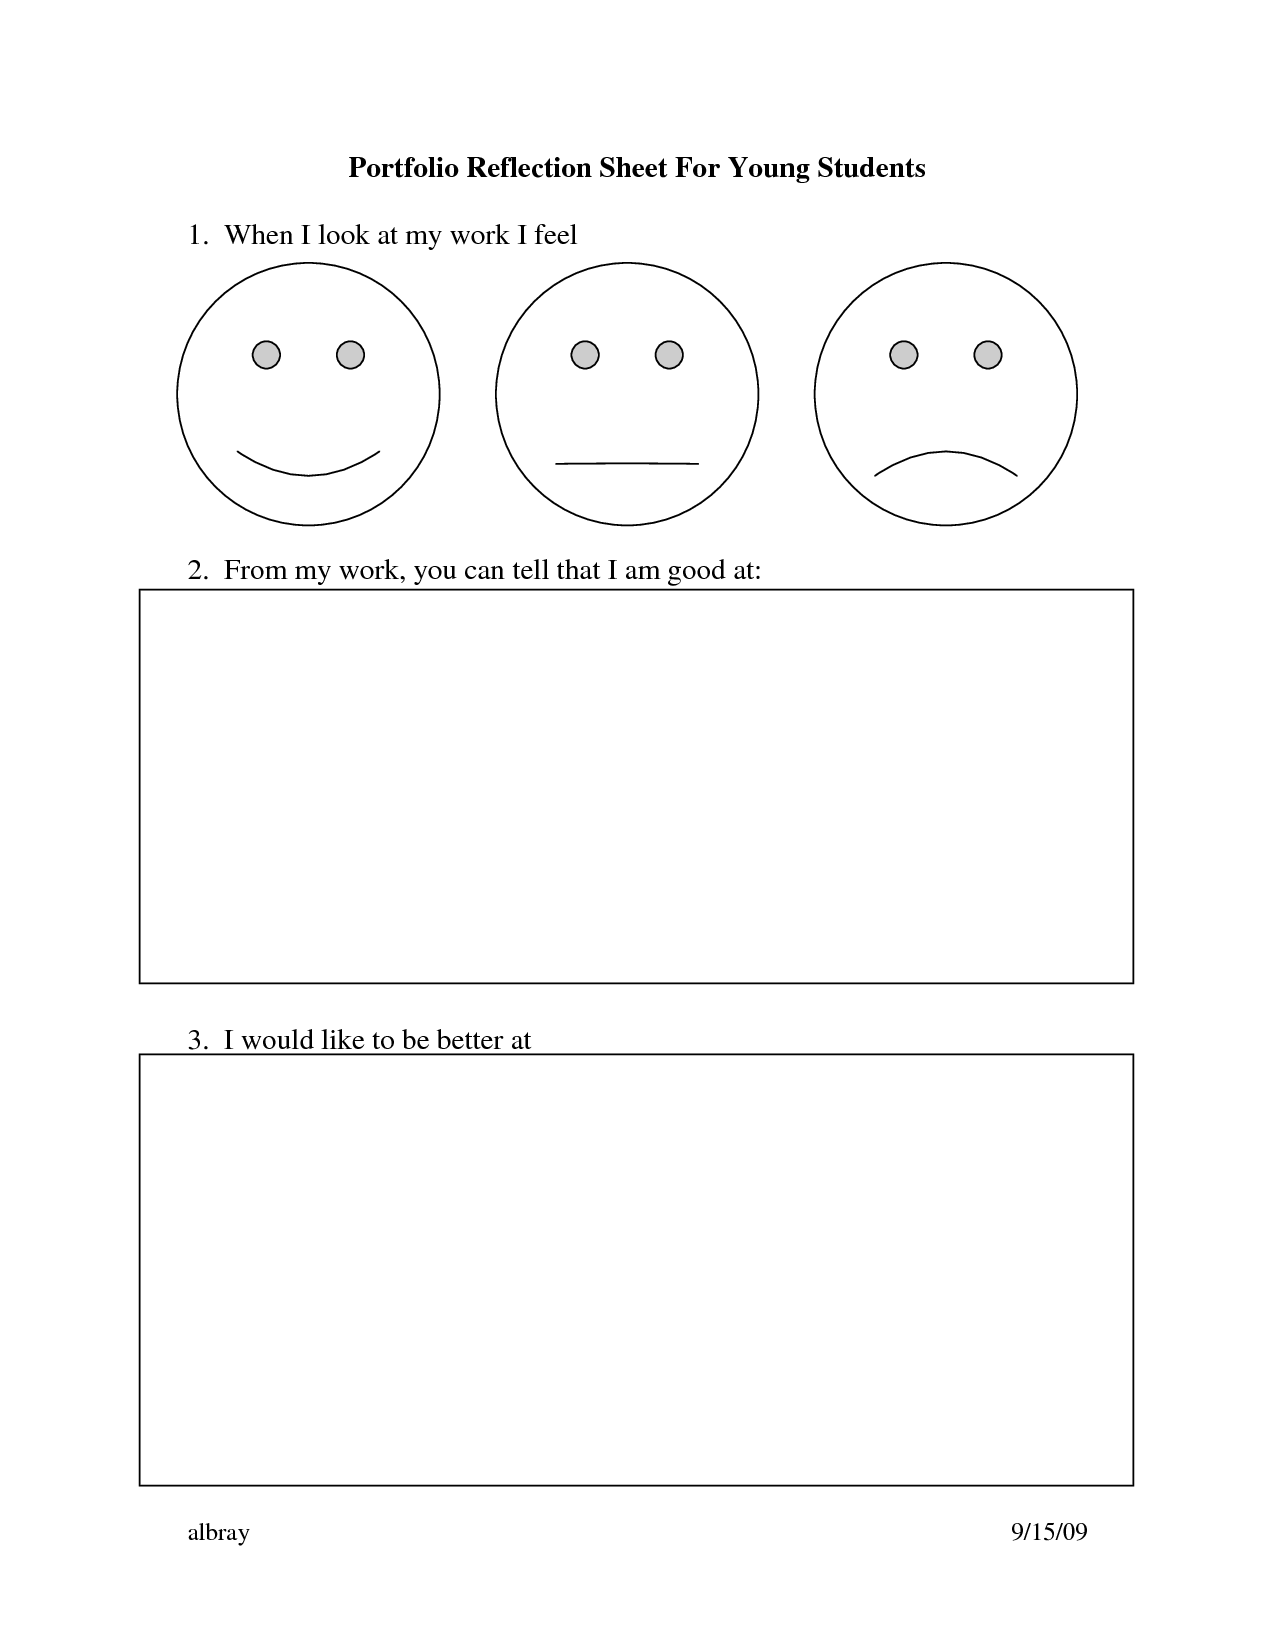 12-best-images-of-student-reflection-worksheets-student-test-reflection-worksheet-student